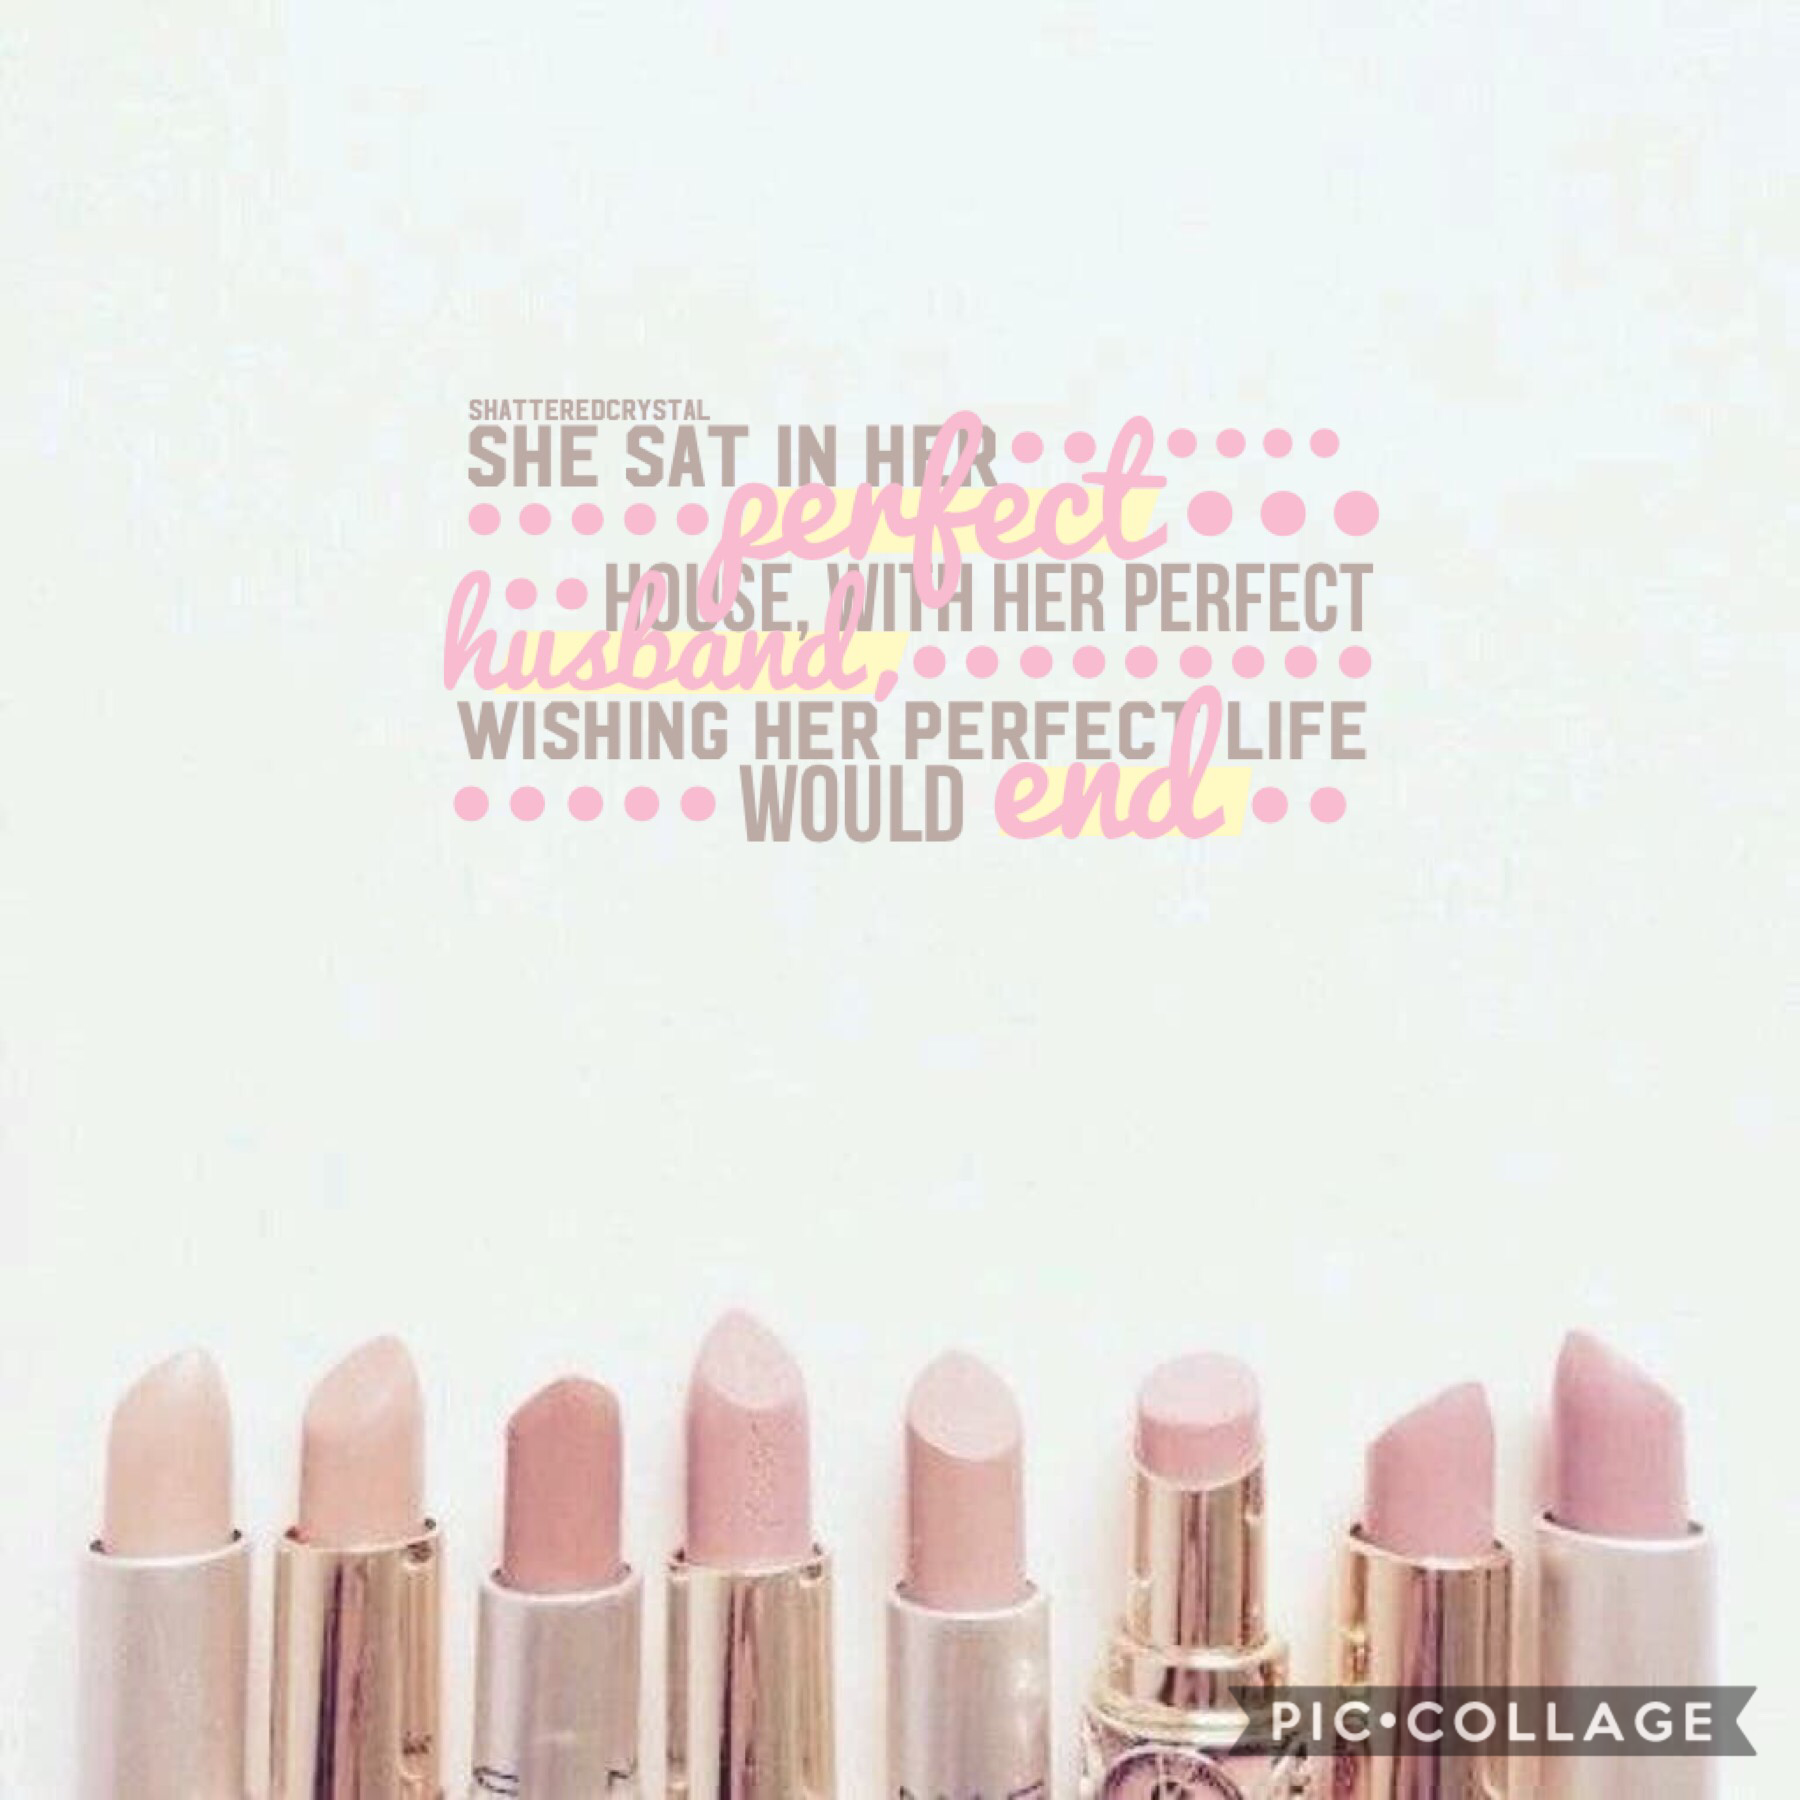 💄TAP💄
I feel like my account is sorta organized right now but with the new collages I’m making, it’s gonna get messed up again between complicated and just text edits😅
QOTD: Favorite Genre of Music? AOTD: EDM but I like mainly everything 